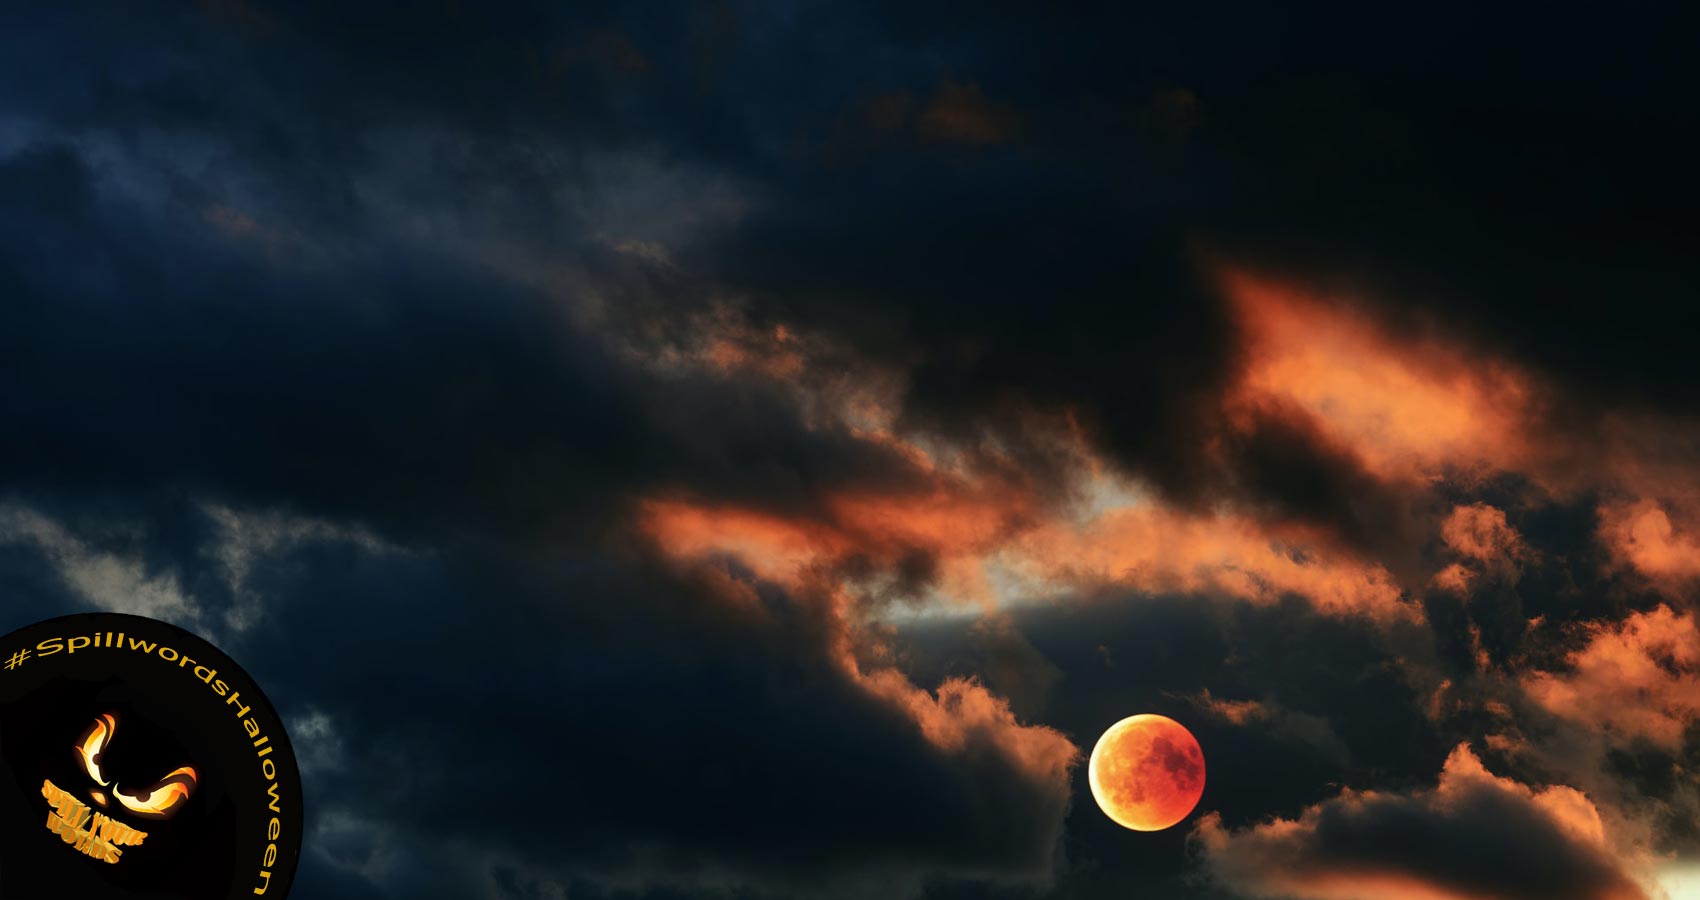 Orange Amid Black on the Eve of November, poetry by Ivanka Fear at Spillwords.com